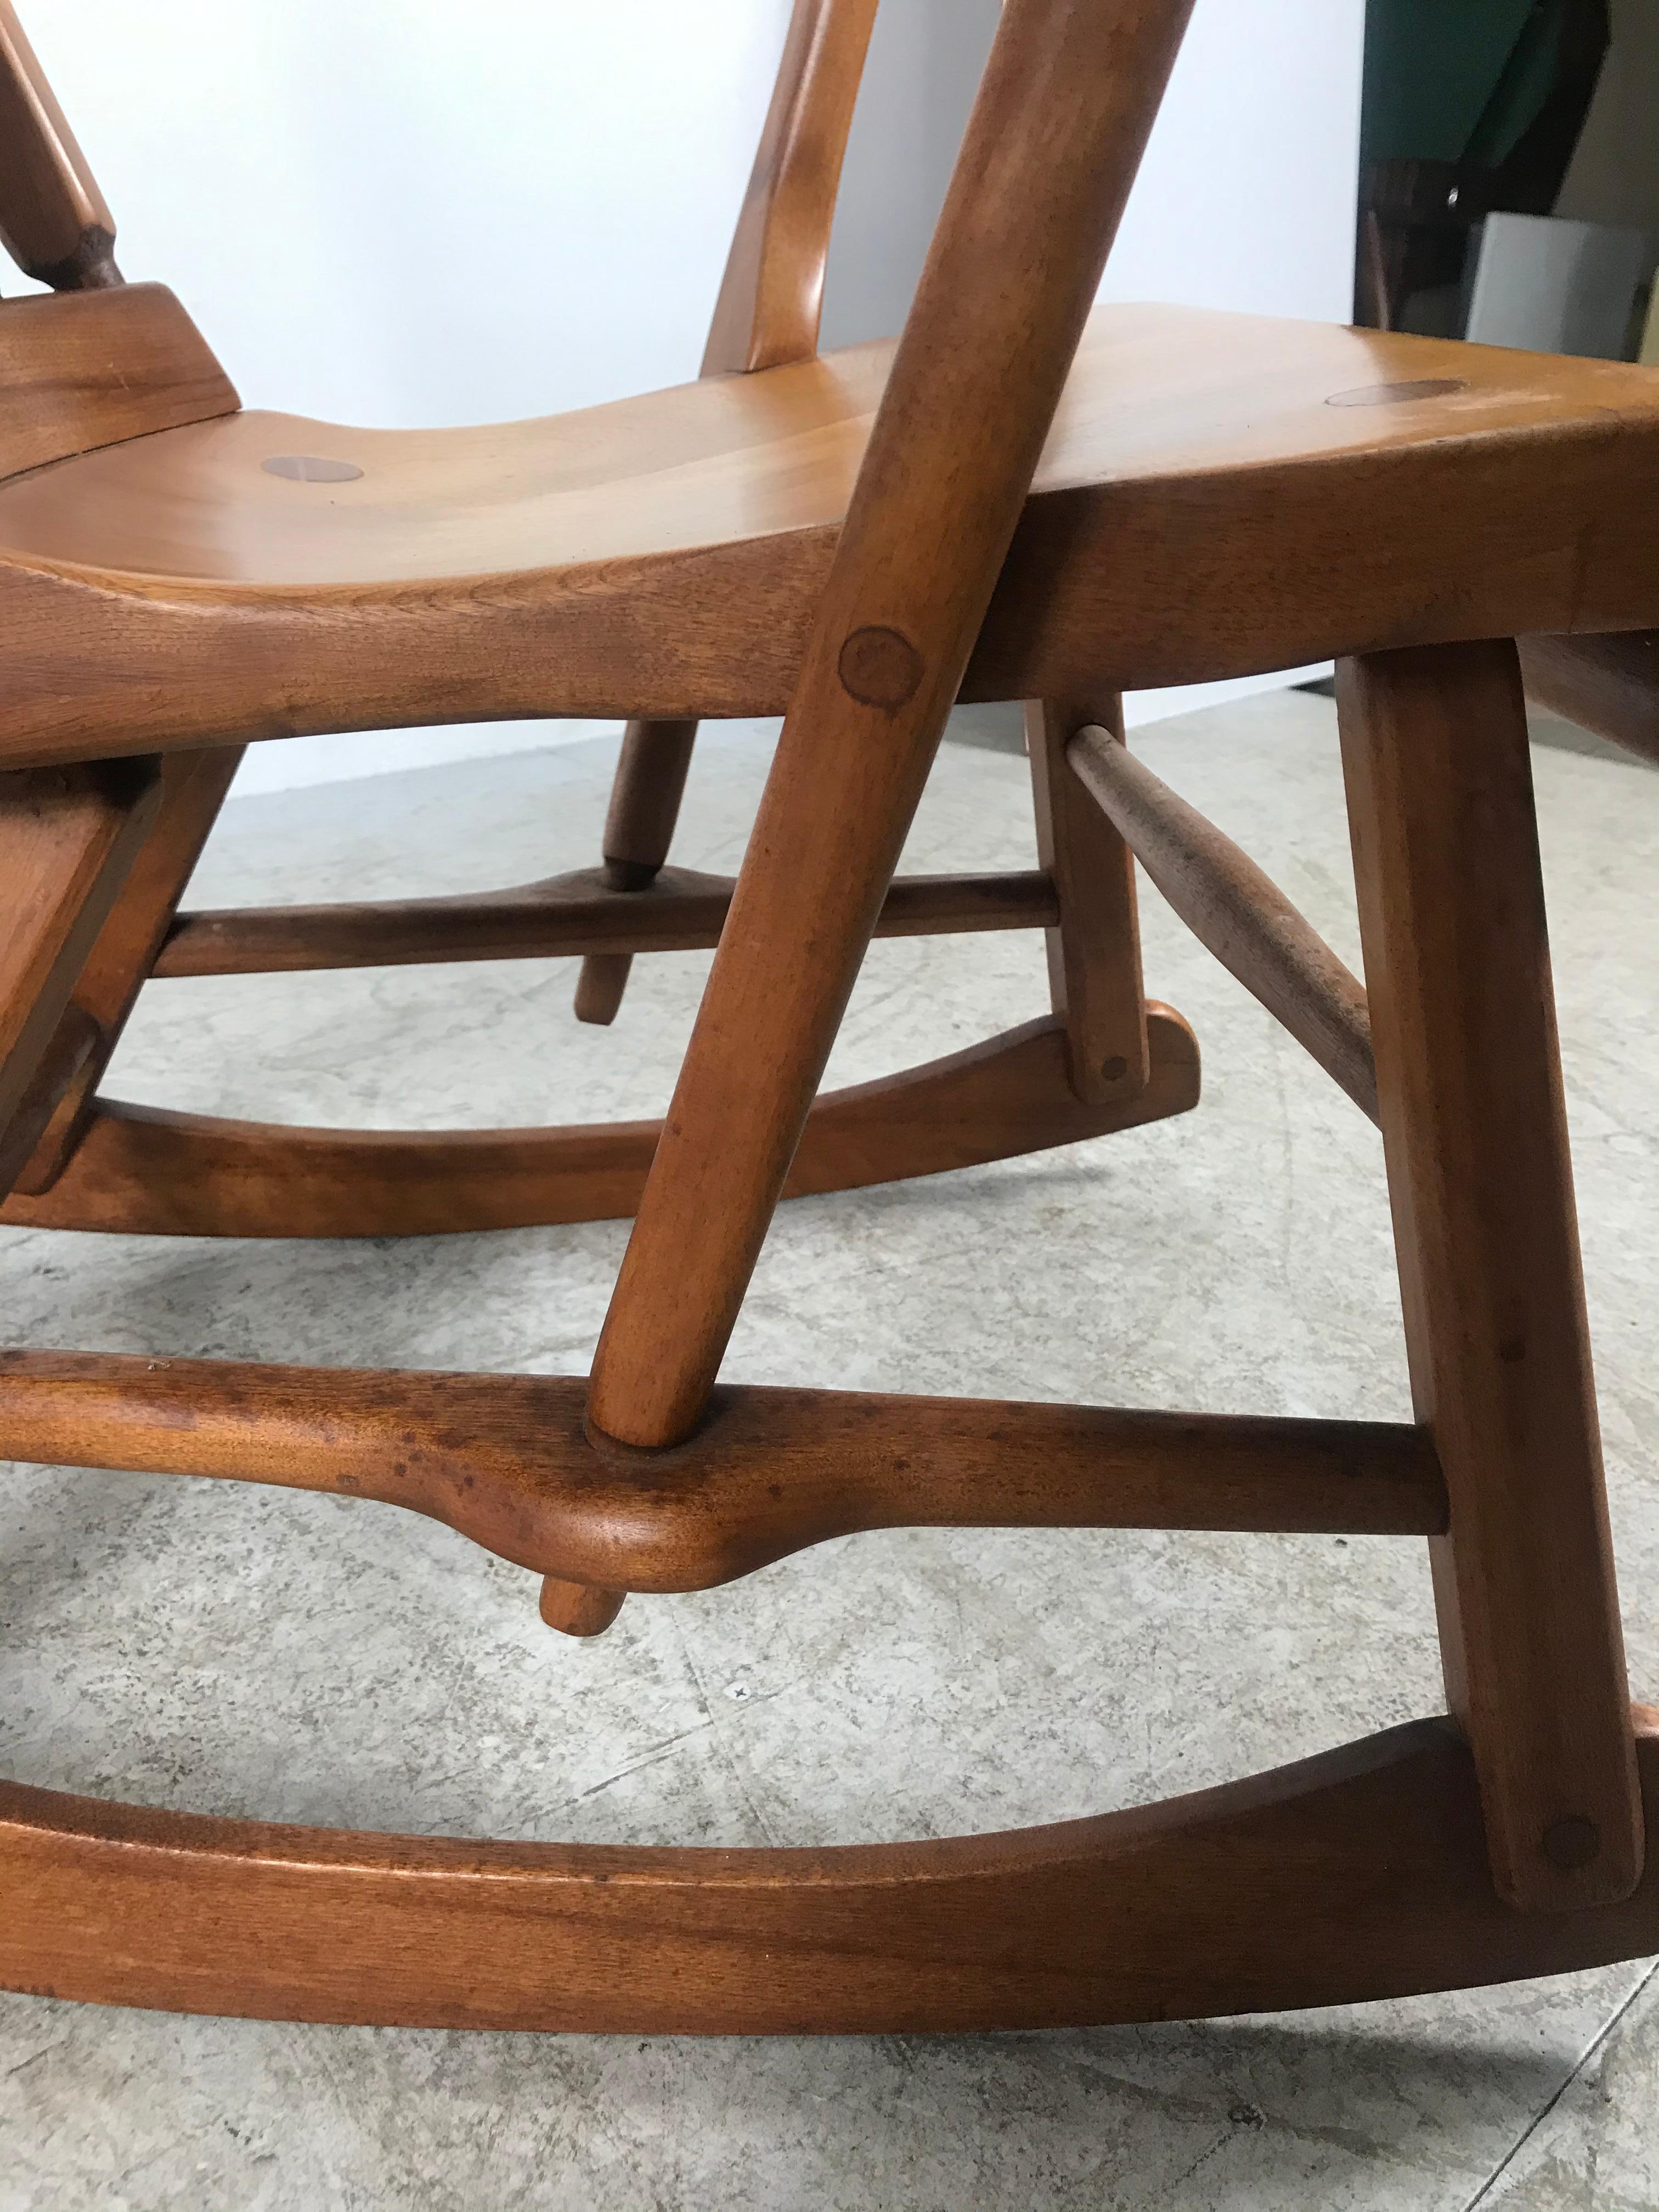 American Colonial modernist solid maple rocker attributed to Sikes Chair co... Superior quality and construction, retains original patina, amazing mortise and Tenon construction, joinery, extremely comfortable. Measure: Arm height 24